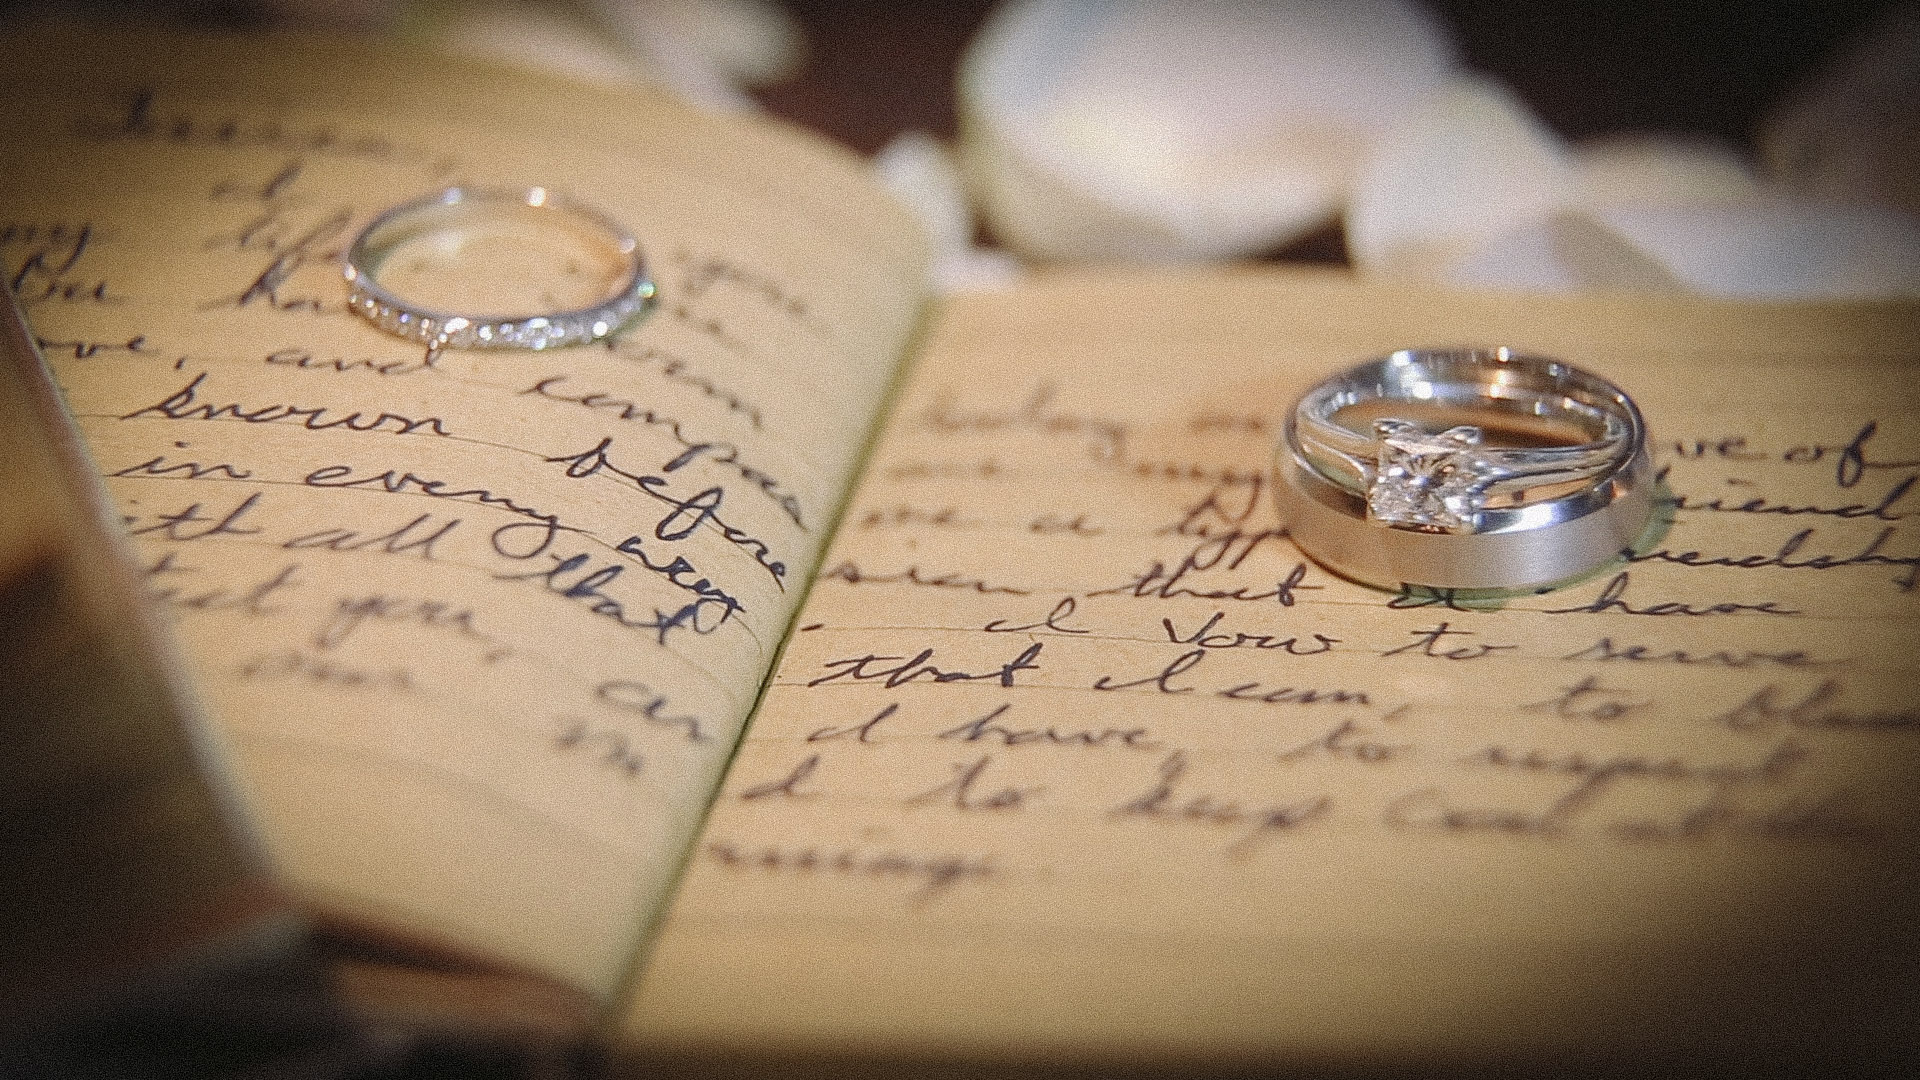 About Rings and Vows